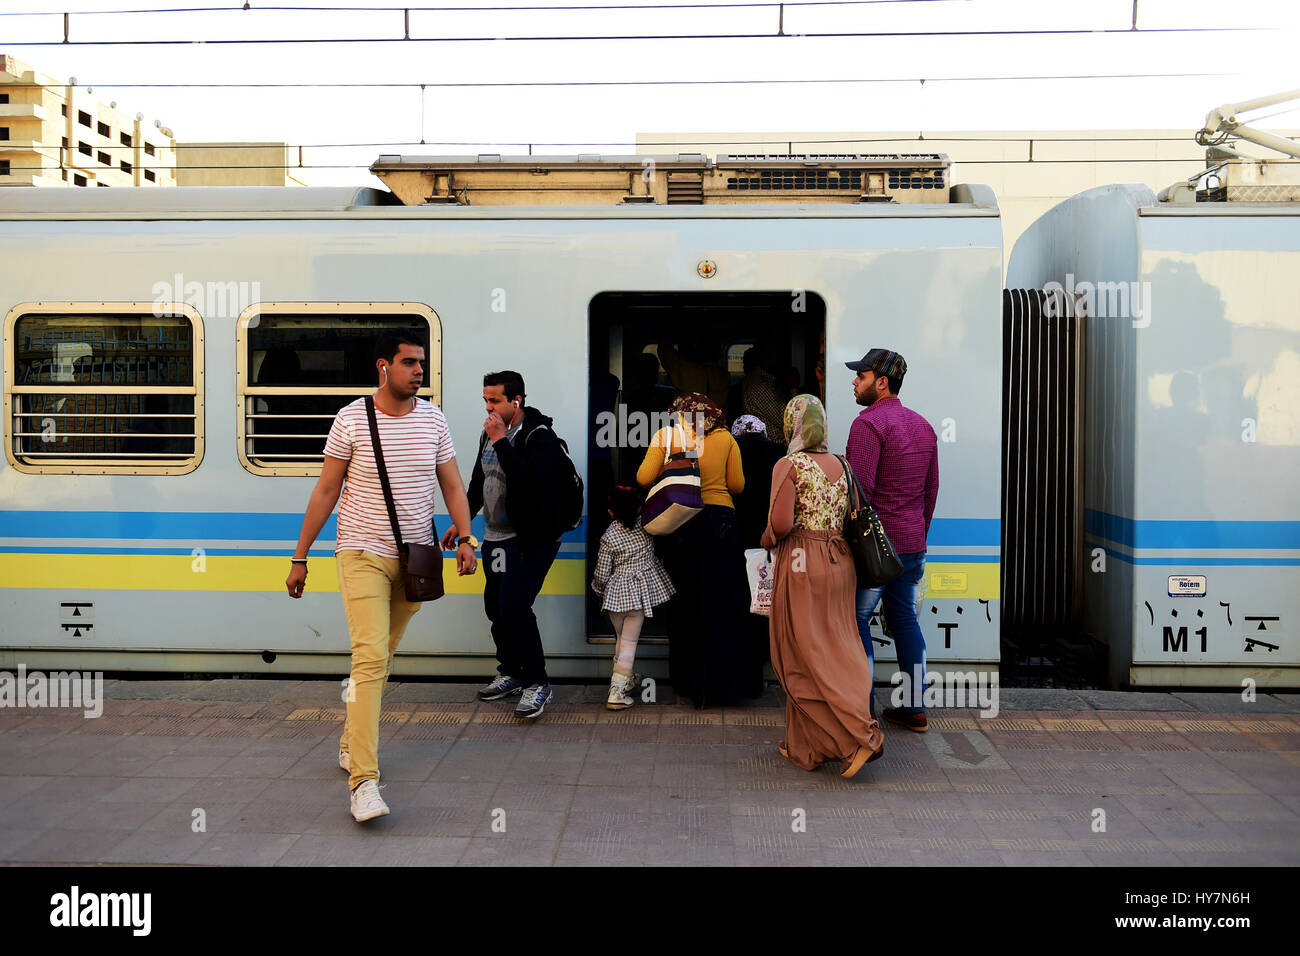 Cairo. 31st Mar, 2017. Passengers get on and off a metro train at Maadi metro station in Cairo, Egypt on March 31, 2017. Egypt has doubled Cairo metro fare amid financial difficulties and nearly 3.5 million commuters relying on Cairo's metro everyday fumed by the move, as they already suffered sharp rise in living costs. Credit: Zhao Dingzhe/Xinhua/Alamy Live News Stock Photo